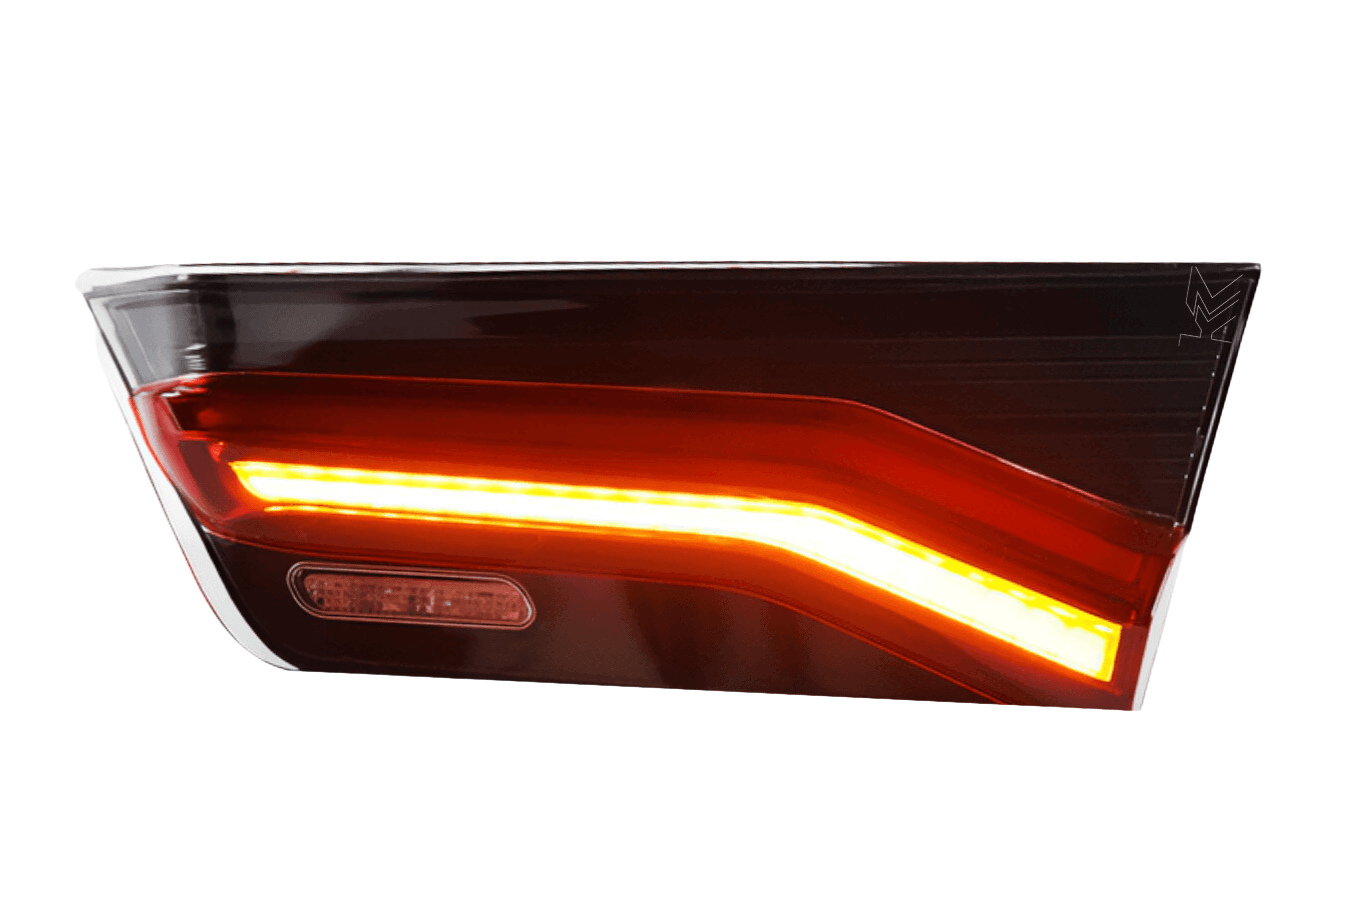 BMW G20 G28 3 Series M3 Laser Headlights With Dual Beam Lens F30 Tail  Lights Parts From Maxdo, $636.55